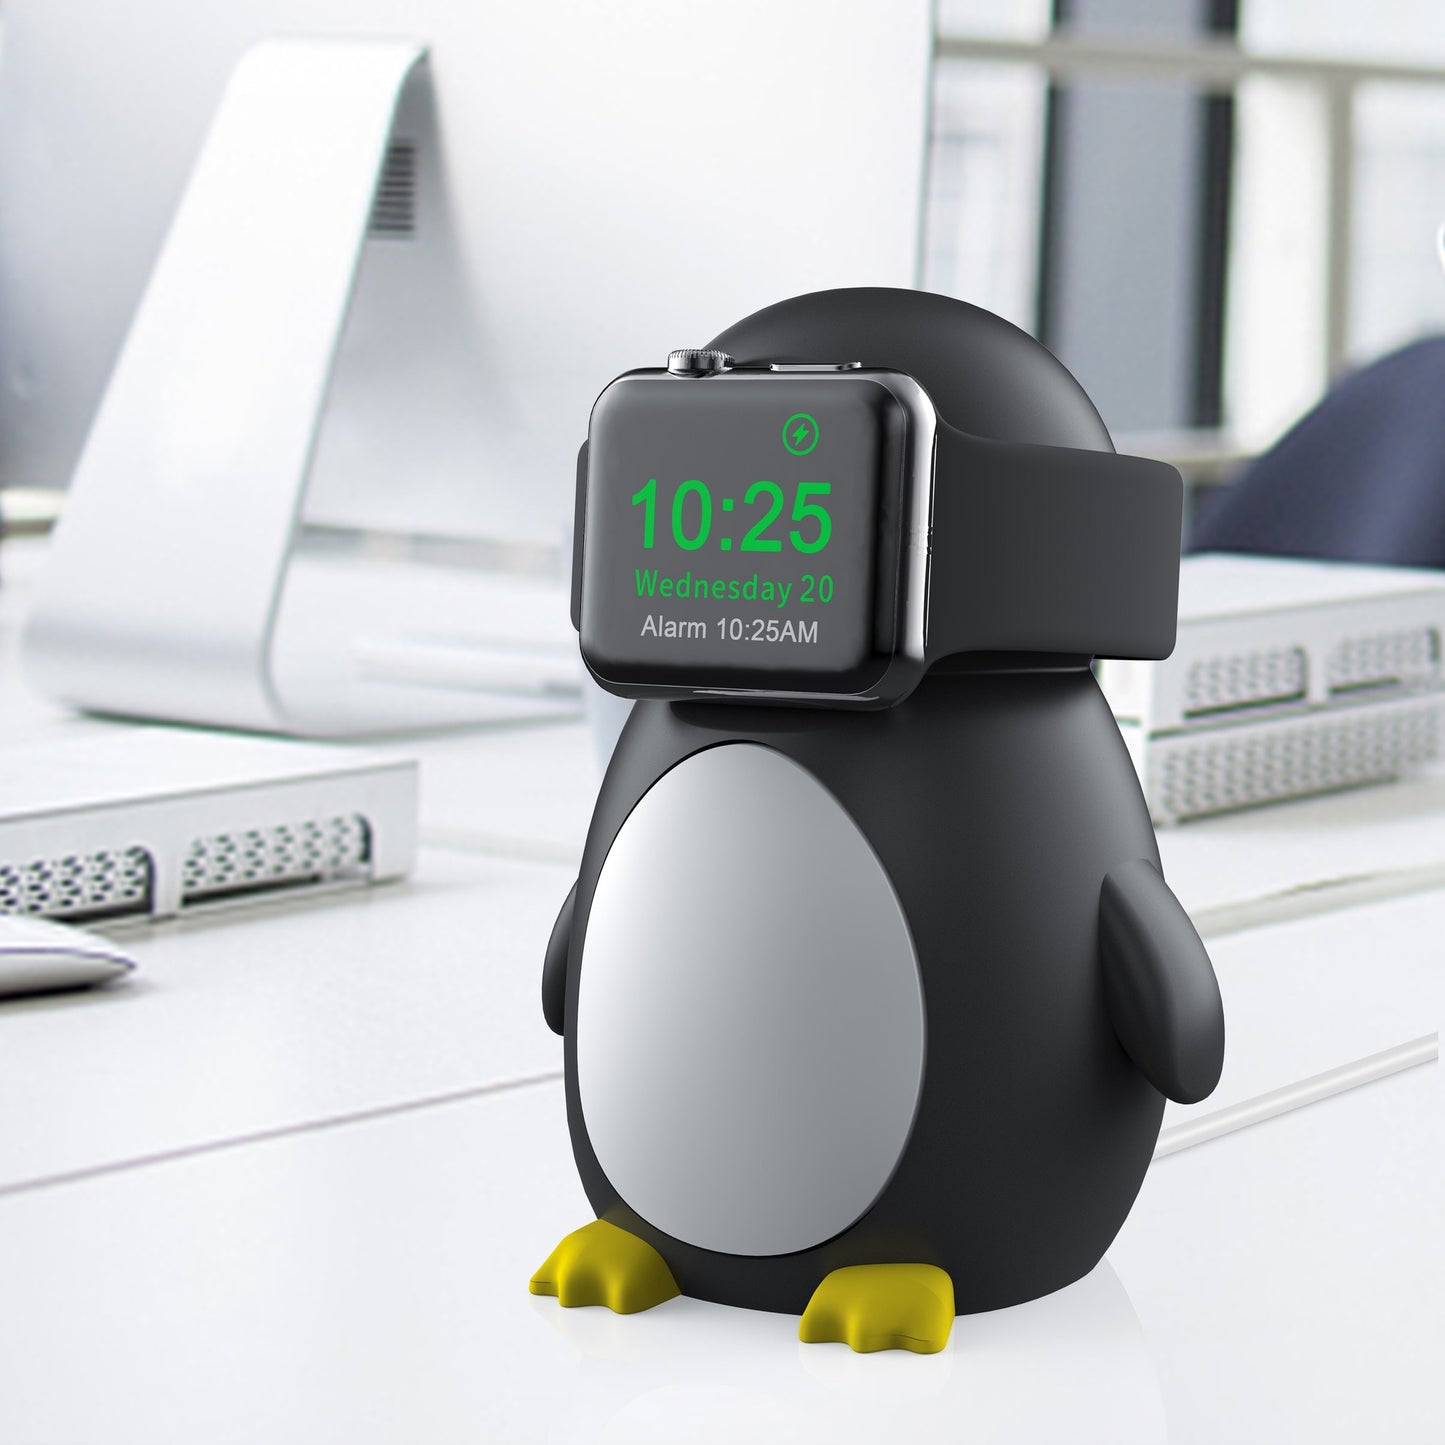 Cartoon Penguin Apple Watch Charging Dock Holder. Charge with a smile!